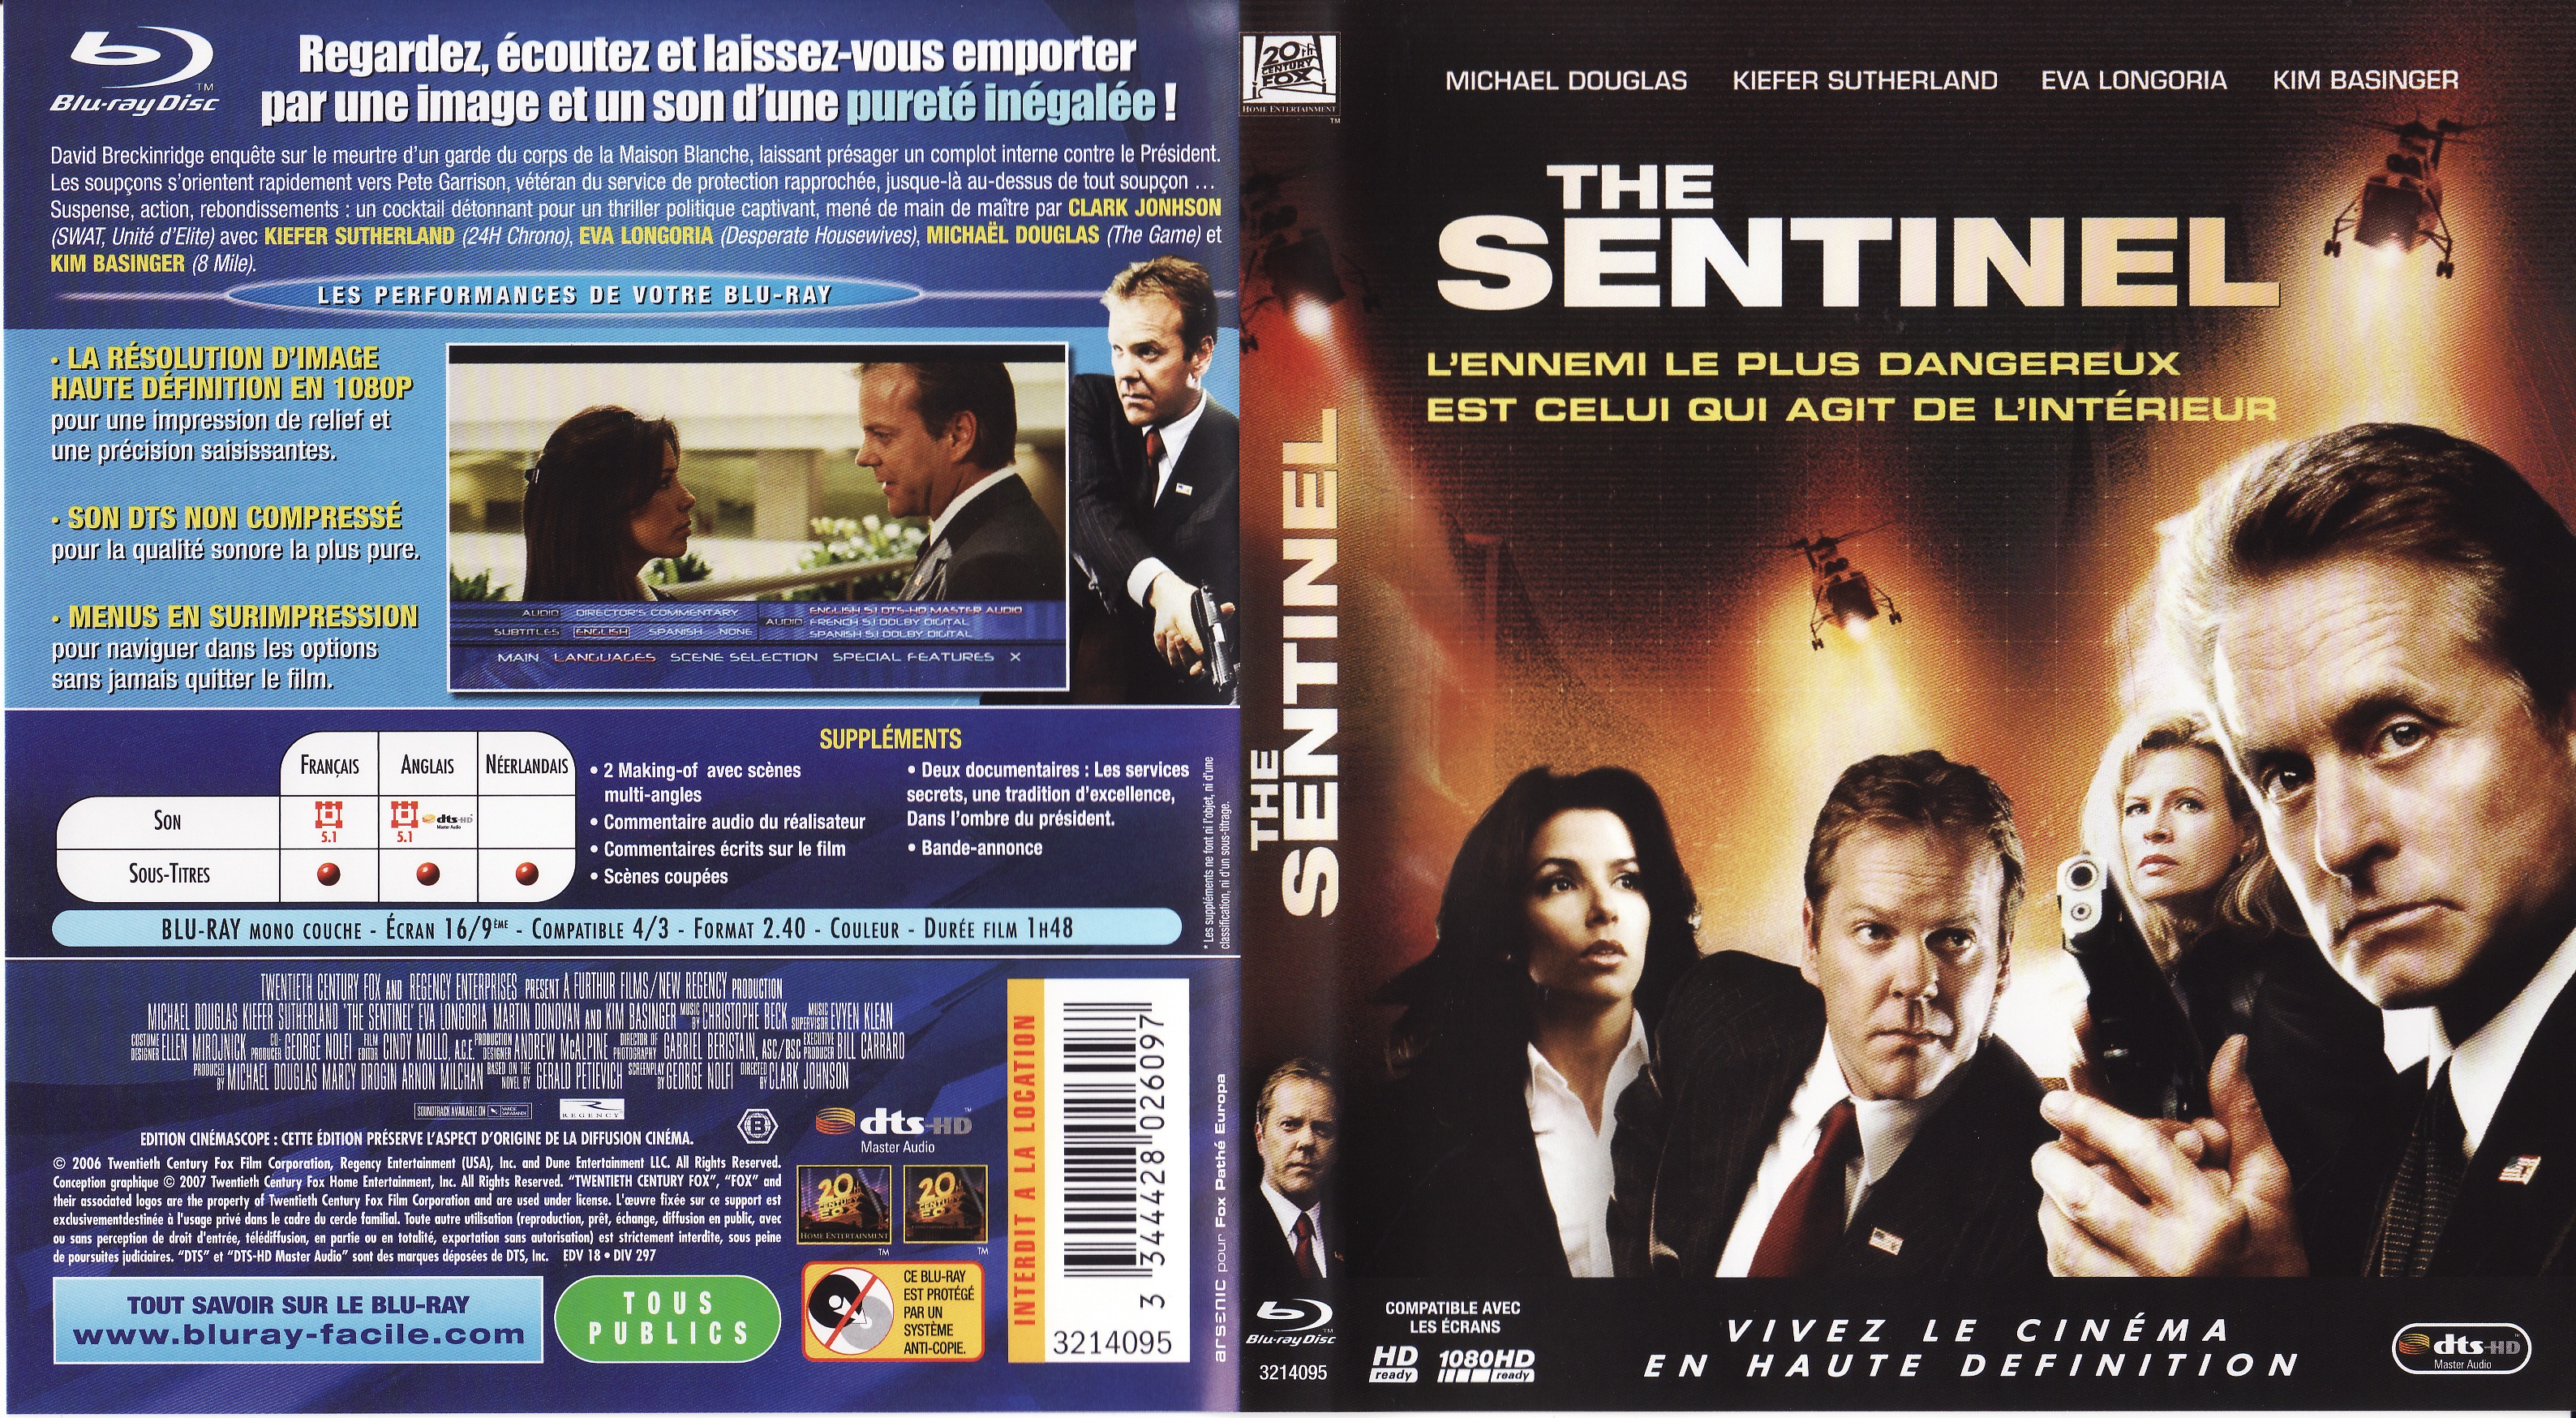 Jaquette DVD The sentinel (BLU-RAY)